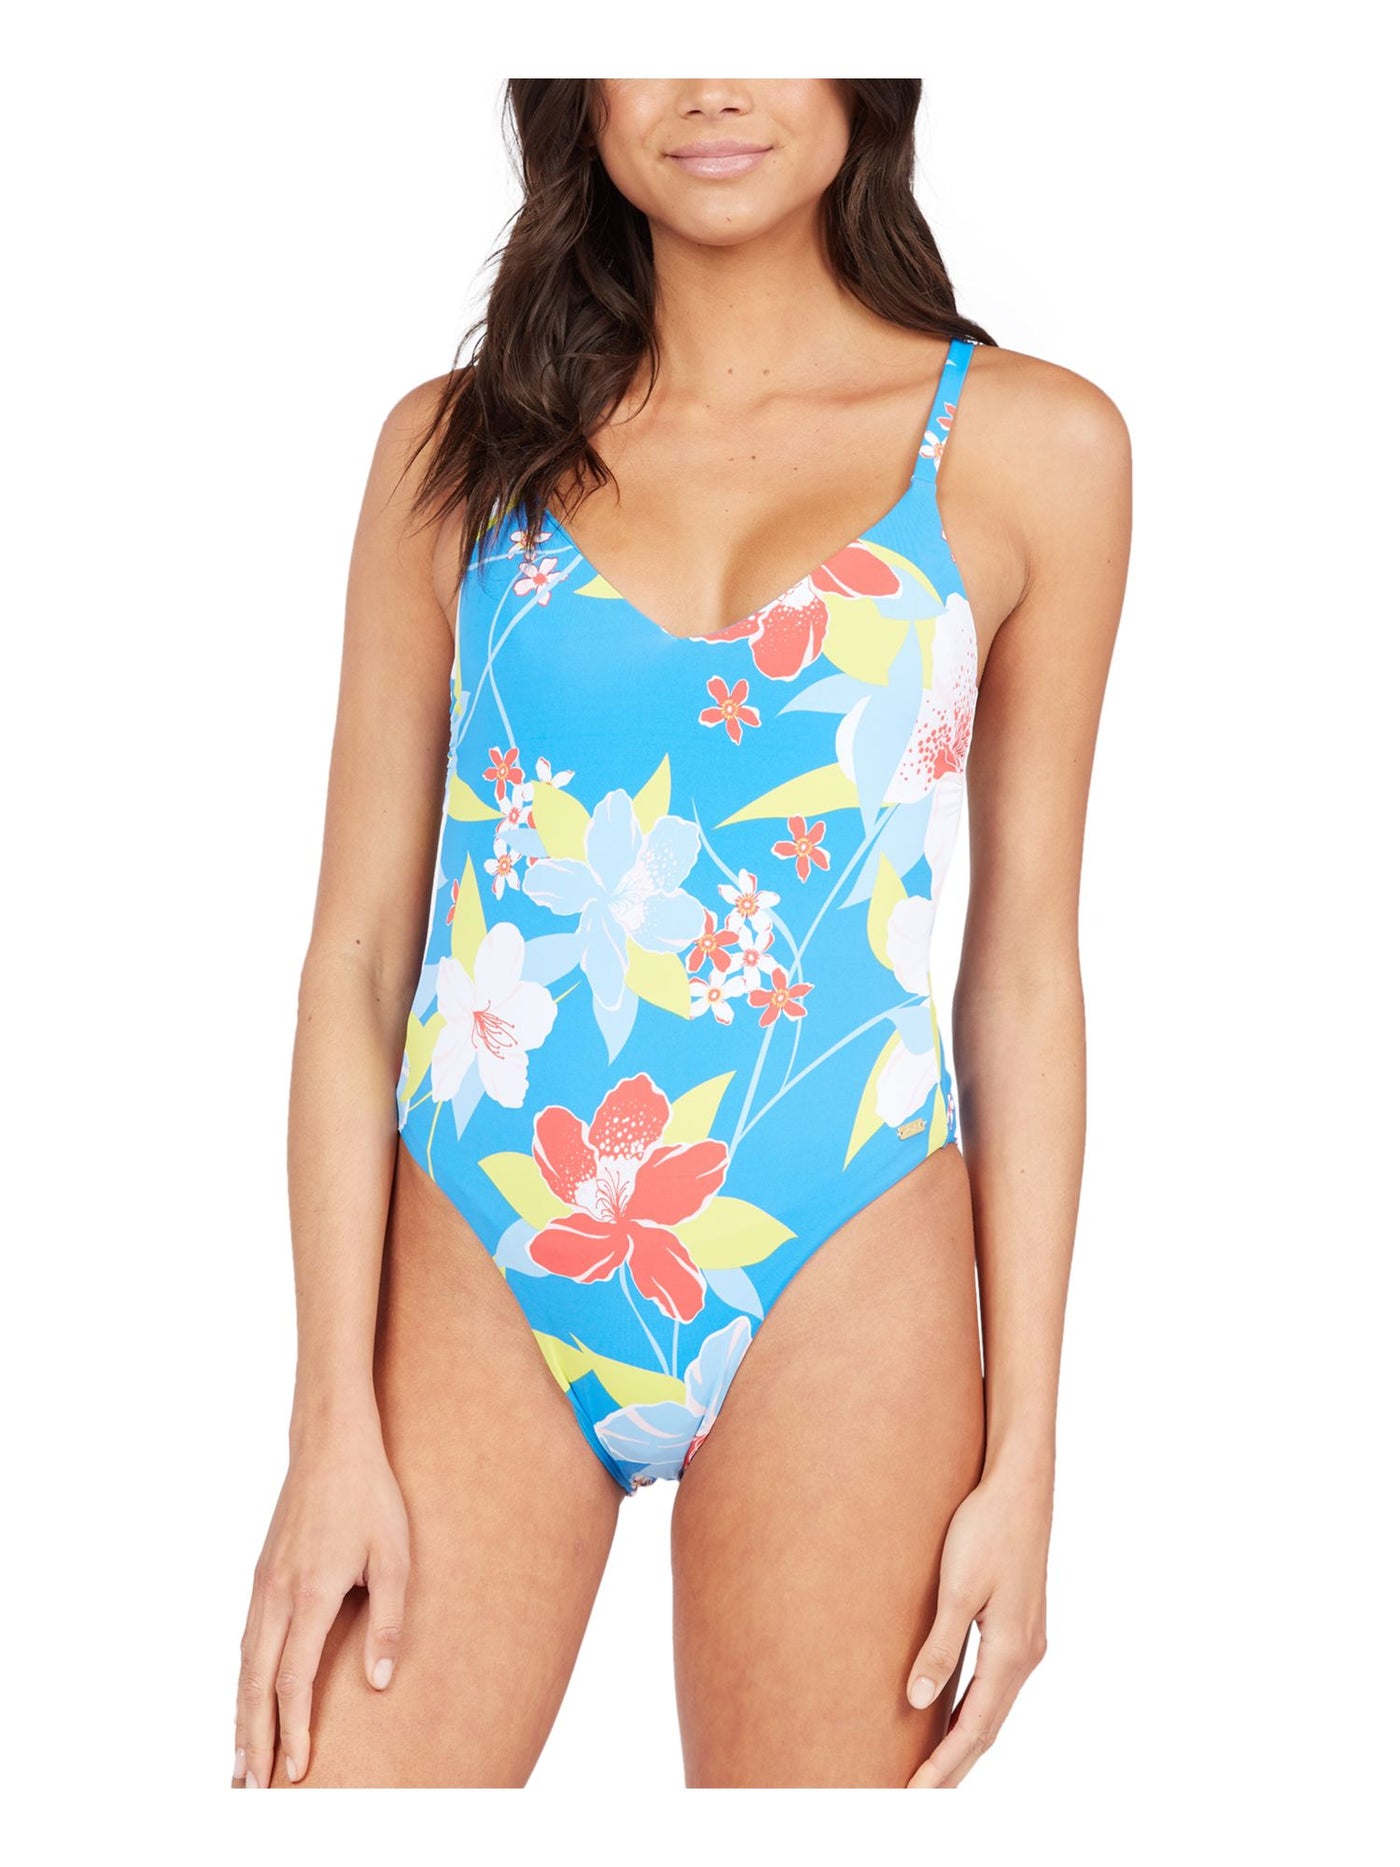 ROXY Women's Blue Floral Removable Cups Deep V Neck Tie She Just Shines One Piece Swimsuit S